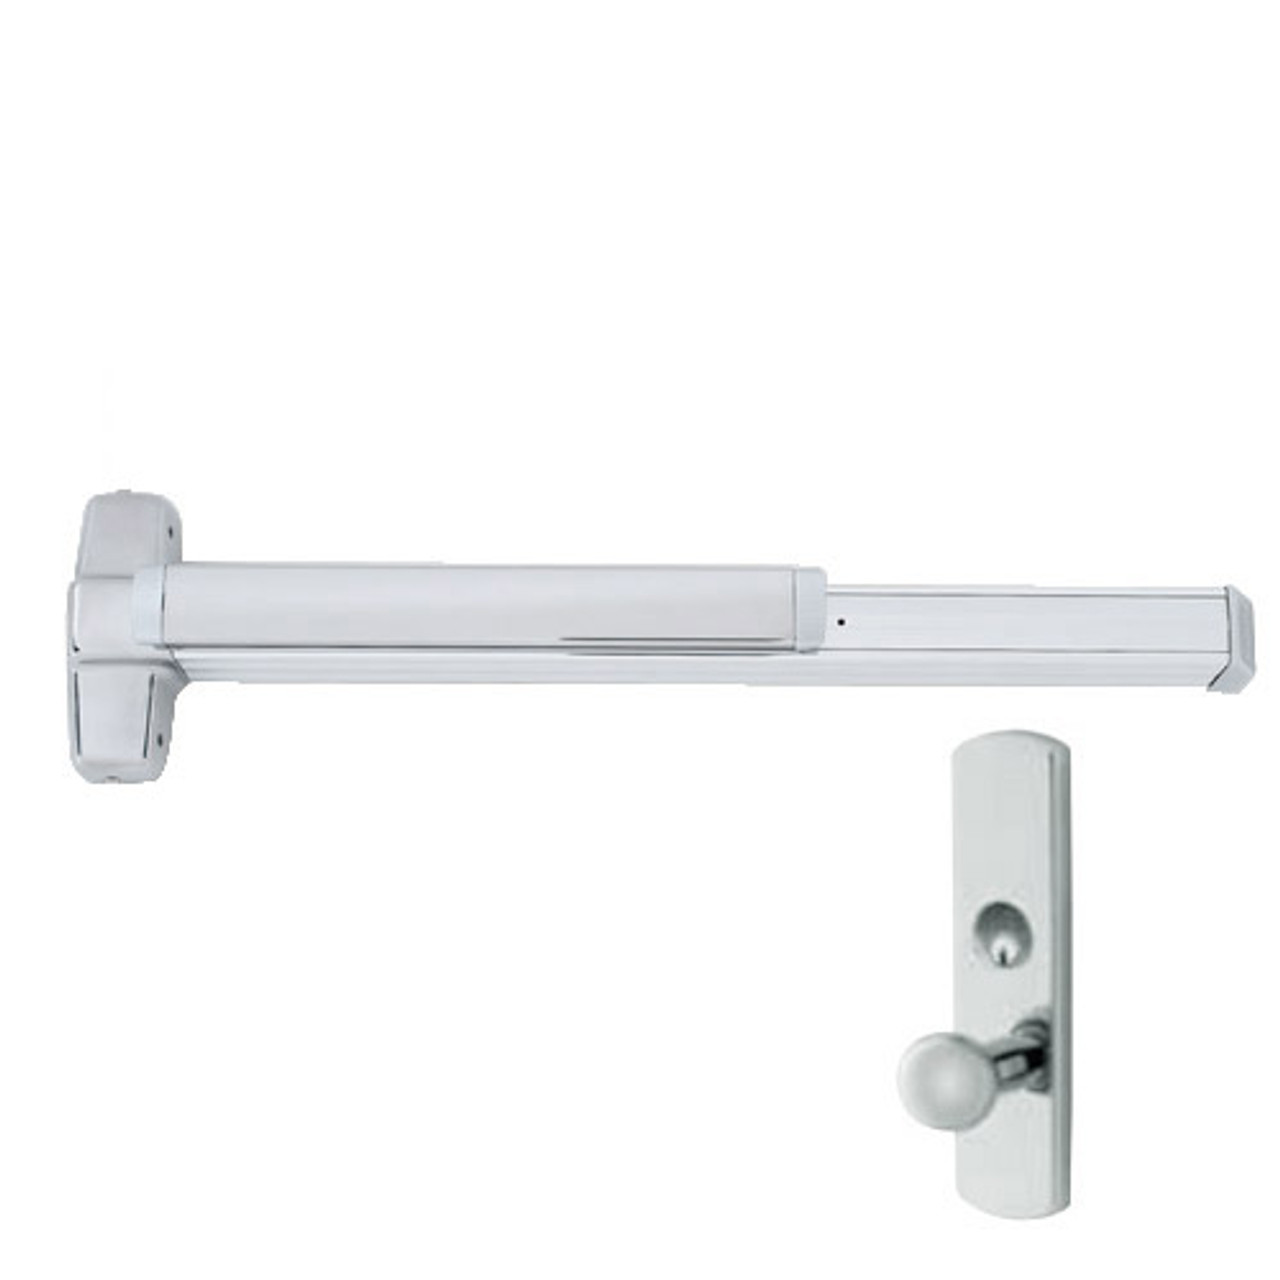 EL9847WDC-K-US28-4 Von Duprin Exit Device with Electric Latch Retraction in Anodized Aluminum